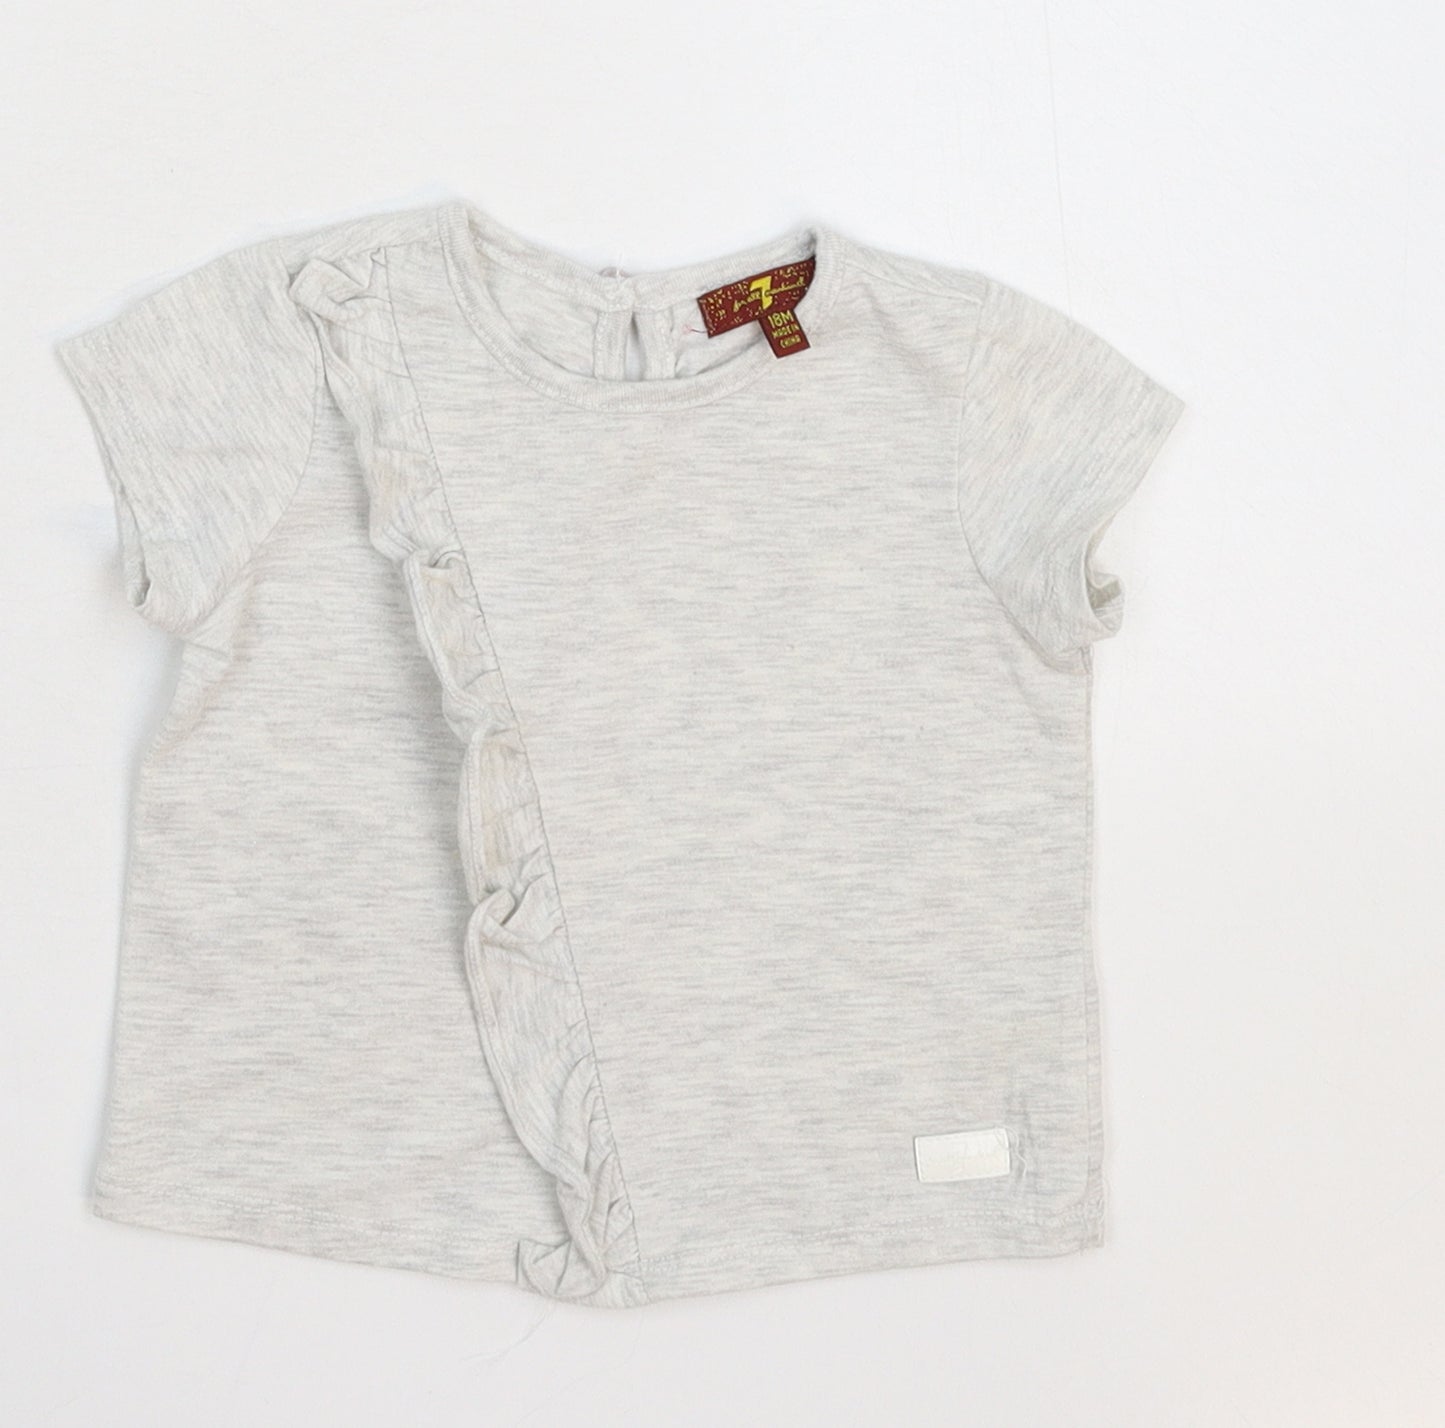 7 For All Mankind Girls Grey   Basic T-Shirt Size 18-24 Months